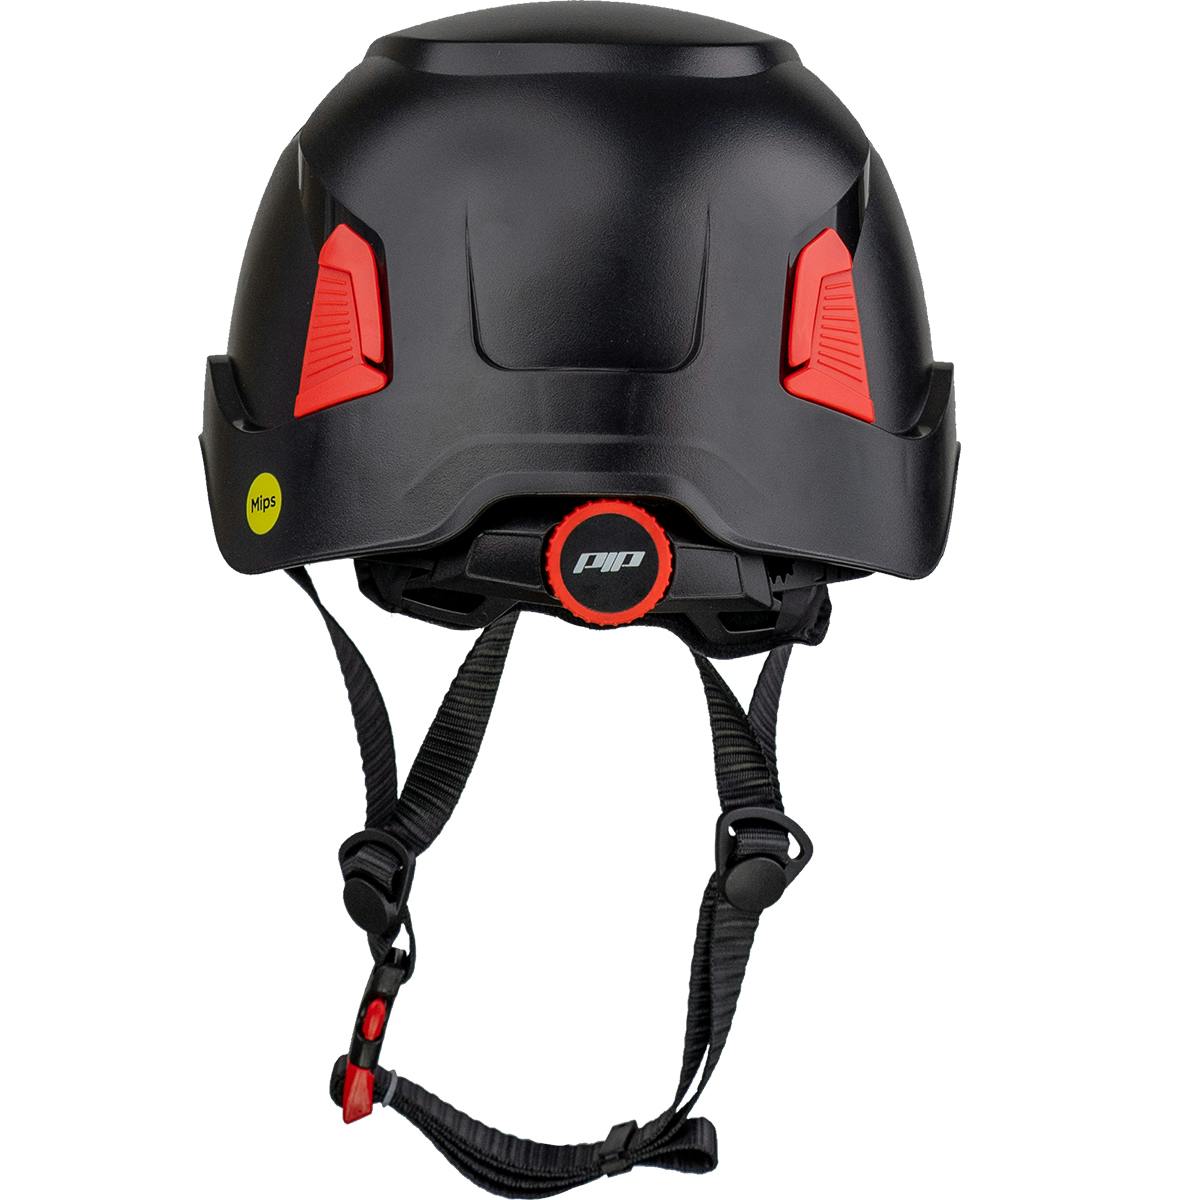 Traverse™ Vented, Industrial Climbing Helmet with Mips® Technology, ABS Shell, EPS Foam Impact Liner, HDPE Suspension, Wheel Ratchet Adjustment and 4-Point Chin Strap (280-HP1491RVM)